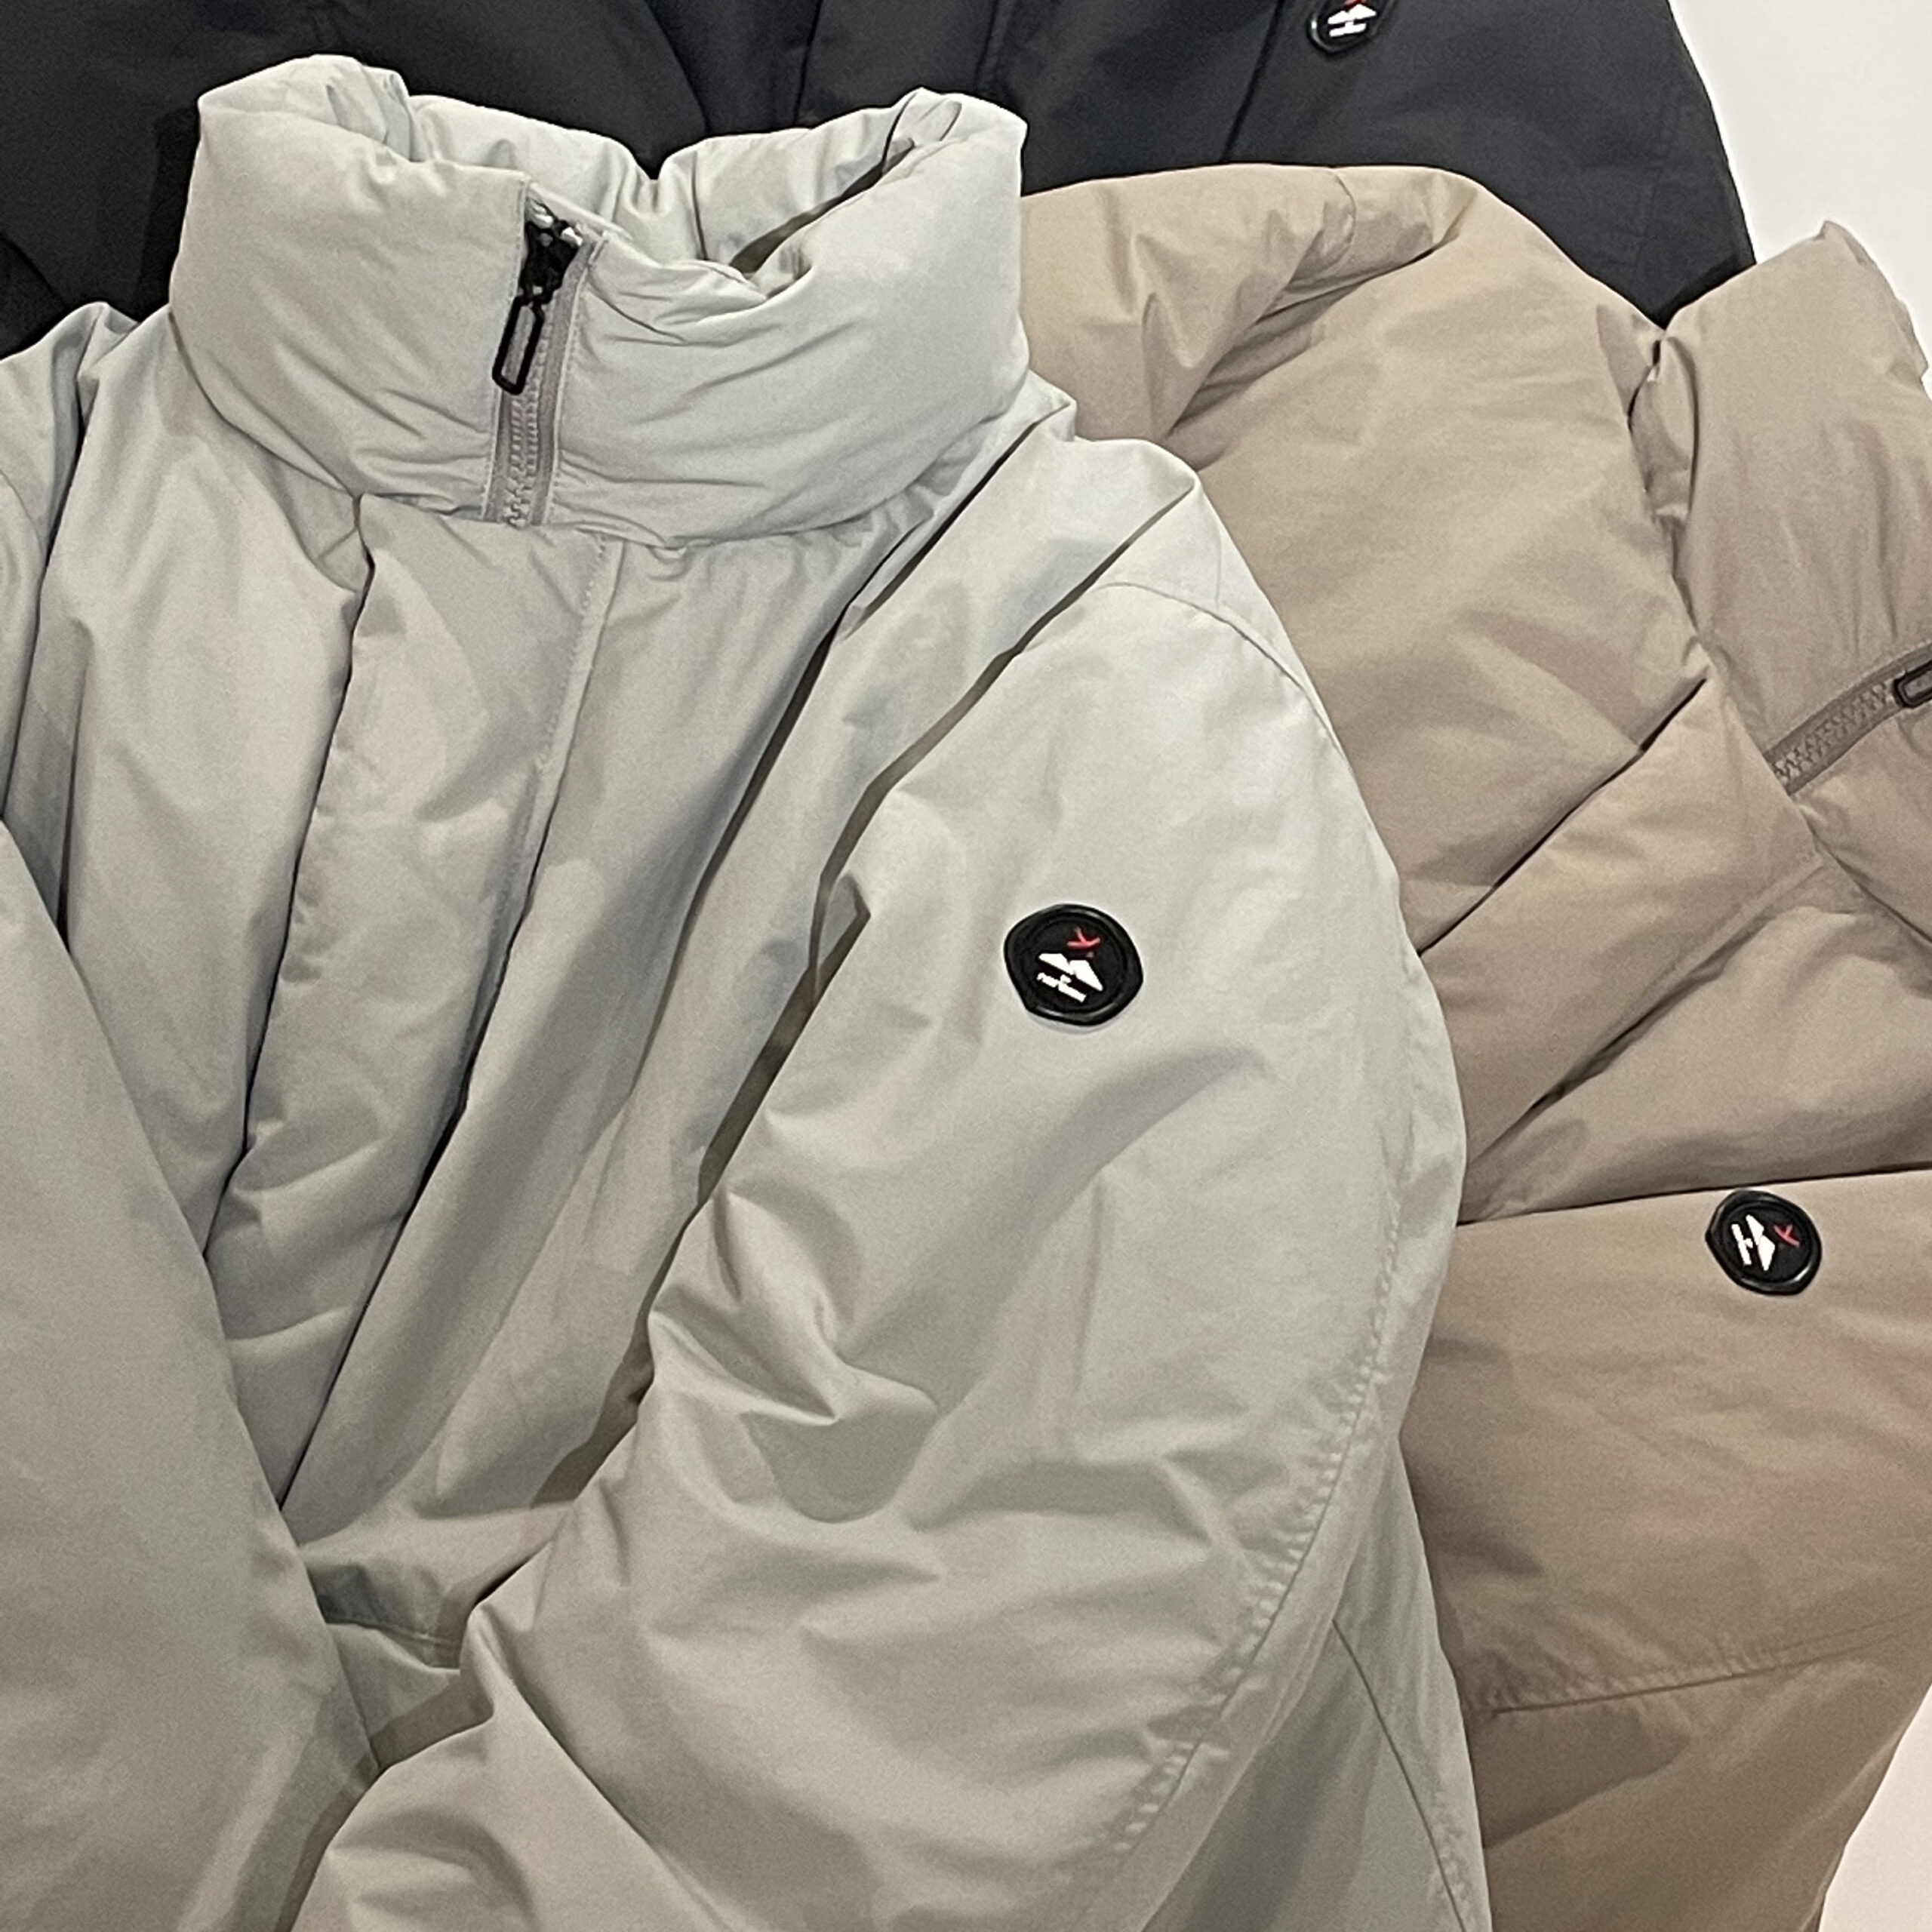 【Y(dot) BY NORDISK・THE INOUE BROTHERS…・DUNO・PARABOOT・CANADA GOOSE・WACKOMARIA・THE NORTH FACE】